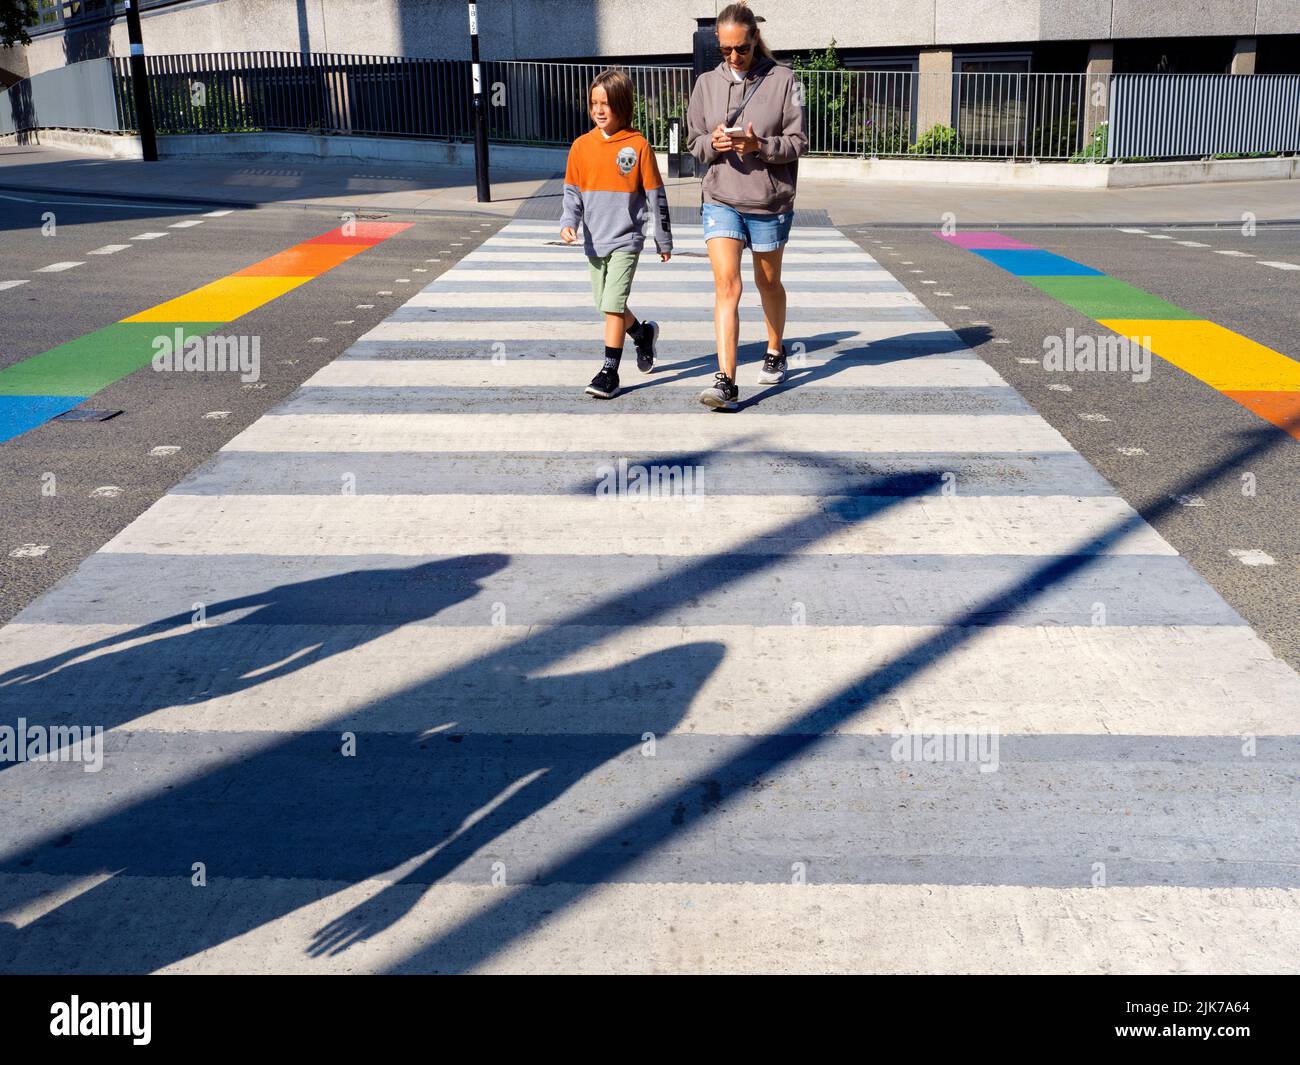 As part of the ongoing Oxford Pride 2022 events, various locations around the city receive rainbow makeovers - like this pedestrian crossing at the ju Stock Photo